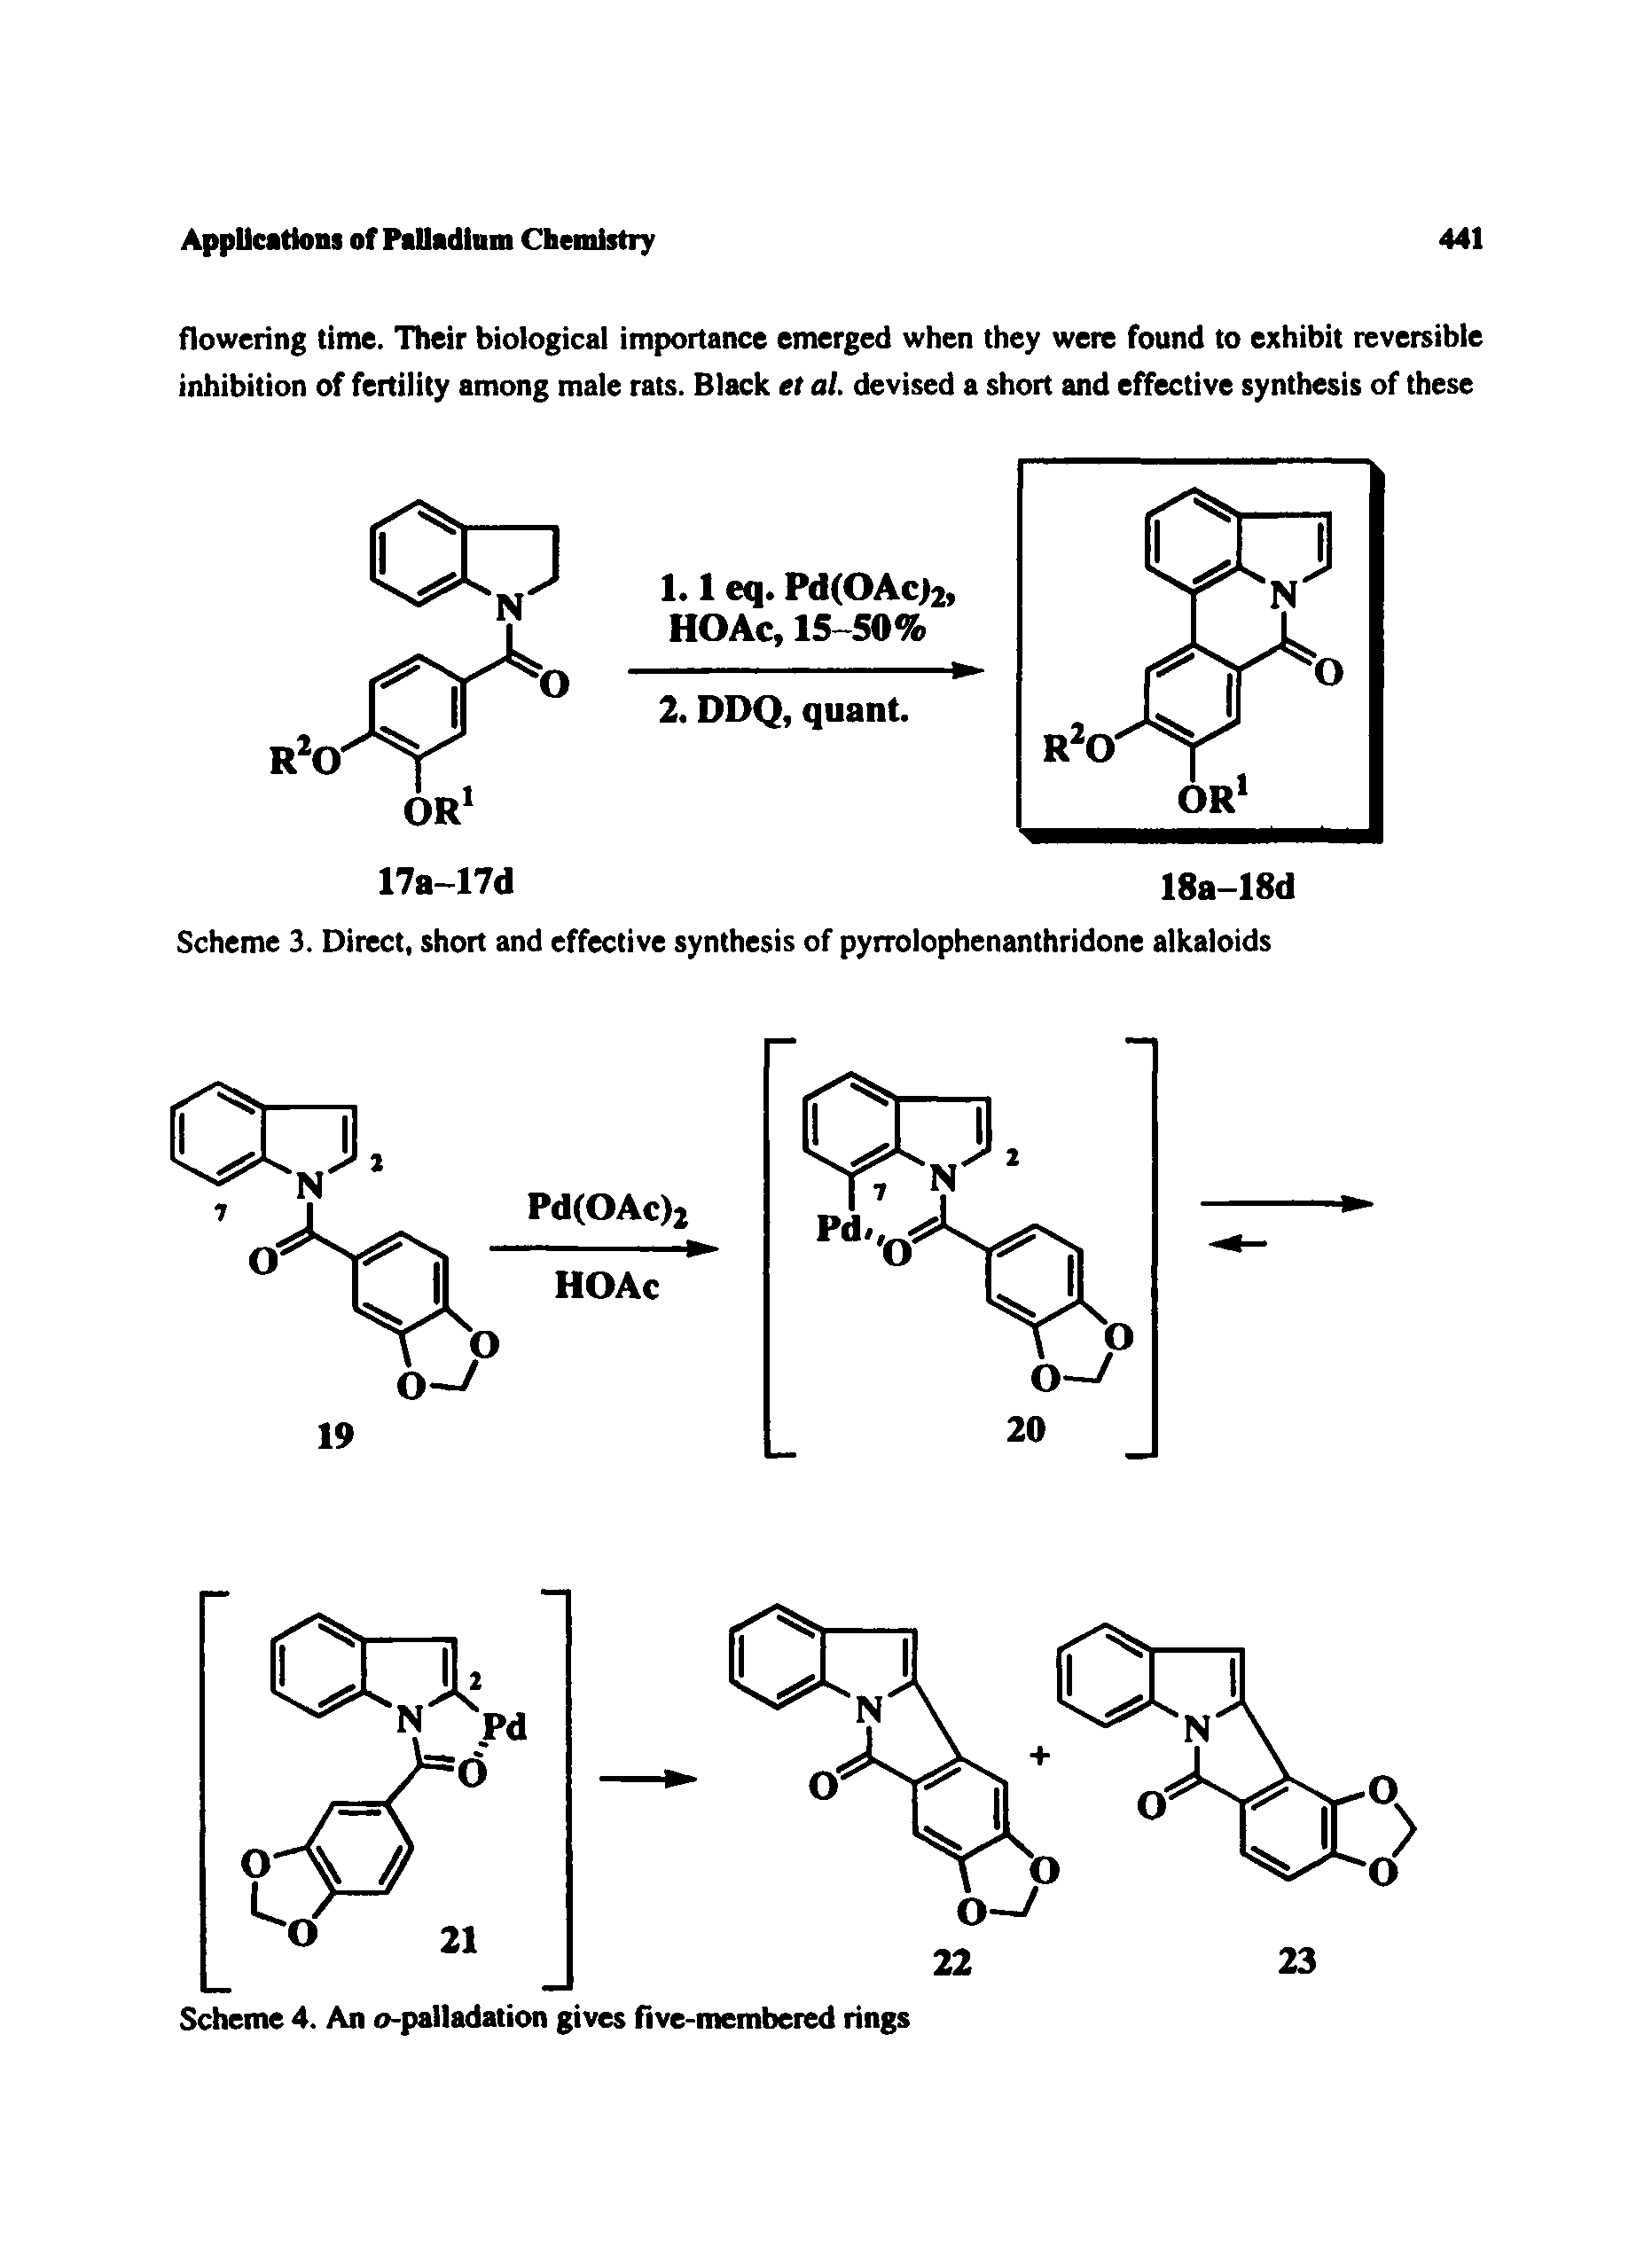 Scheme 3. Direct, short and effective synthesis of pyrrolophenanthridone alkaloids...